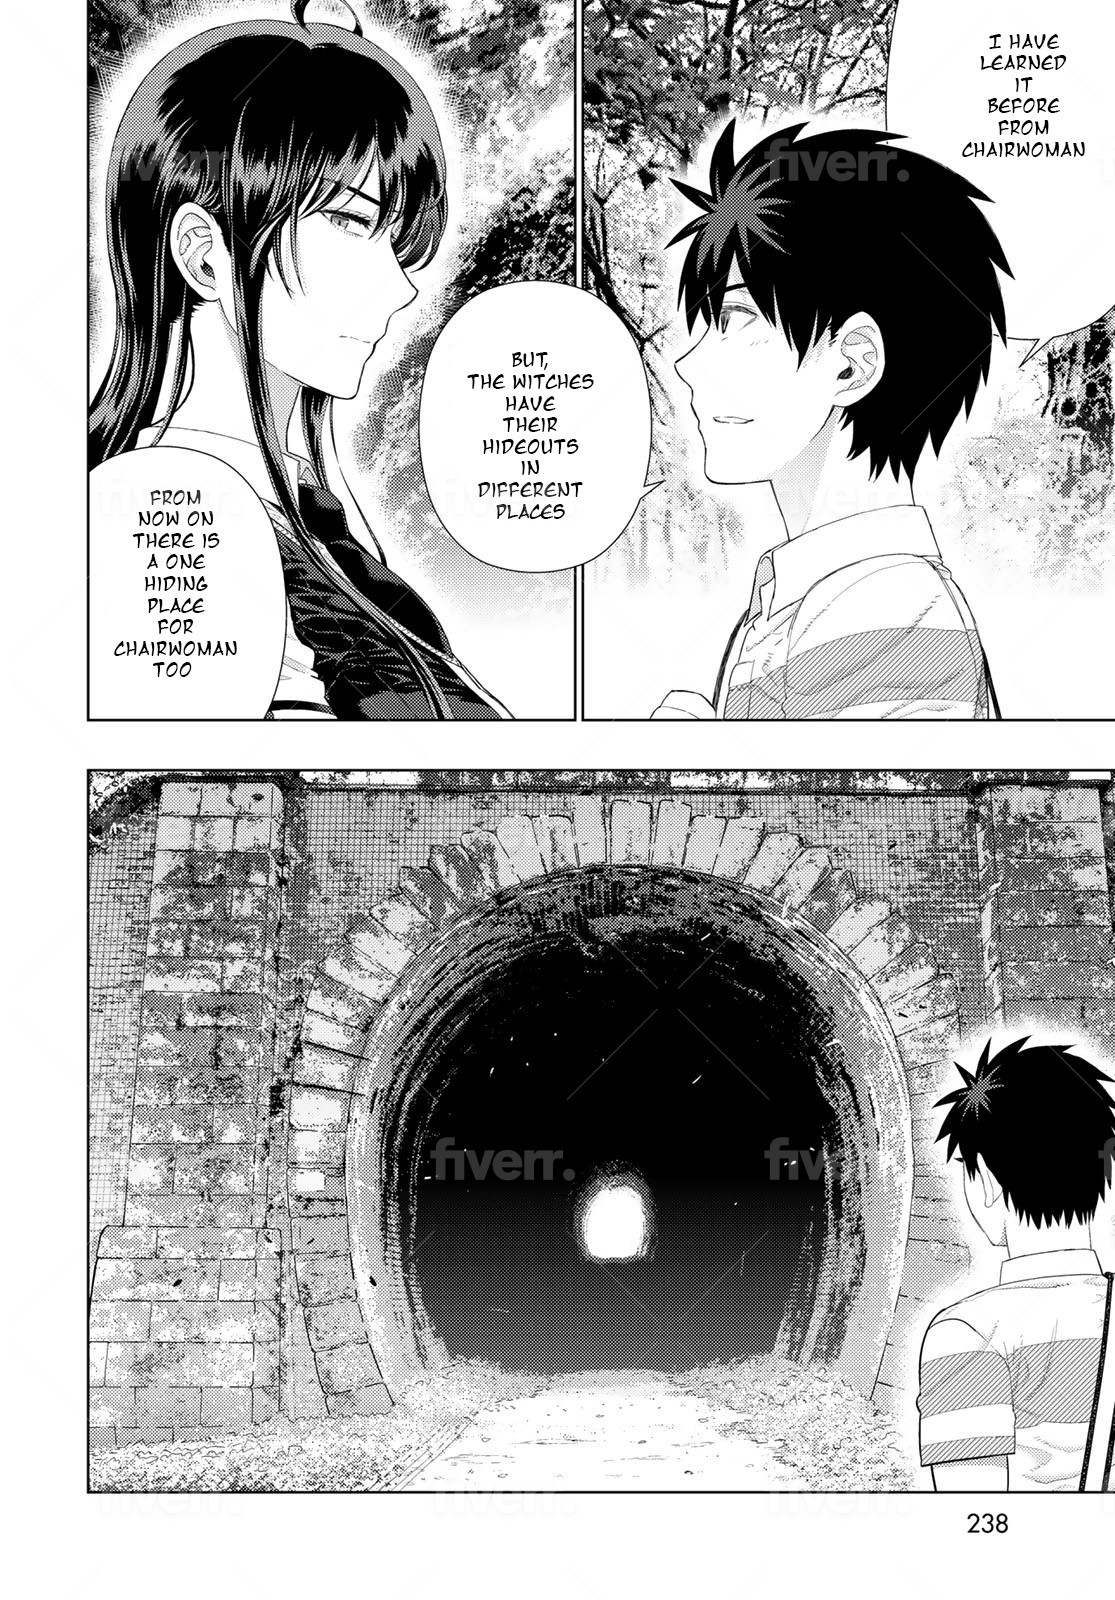 Witchcraft Works Chapter 107